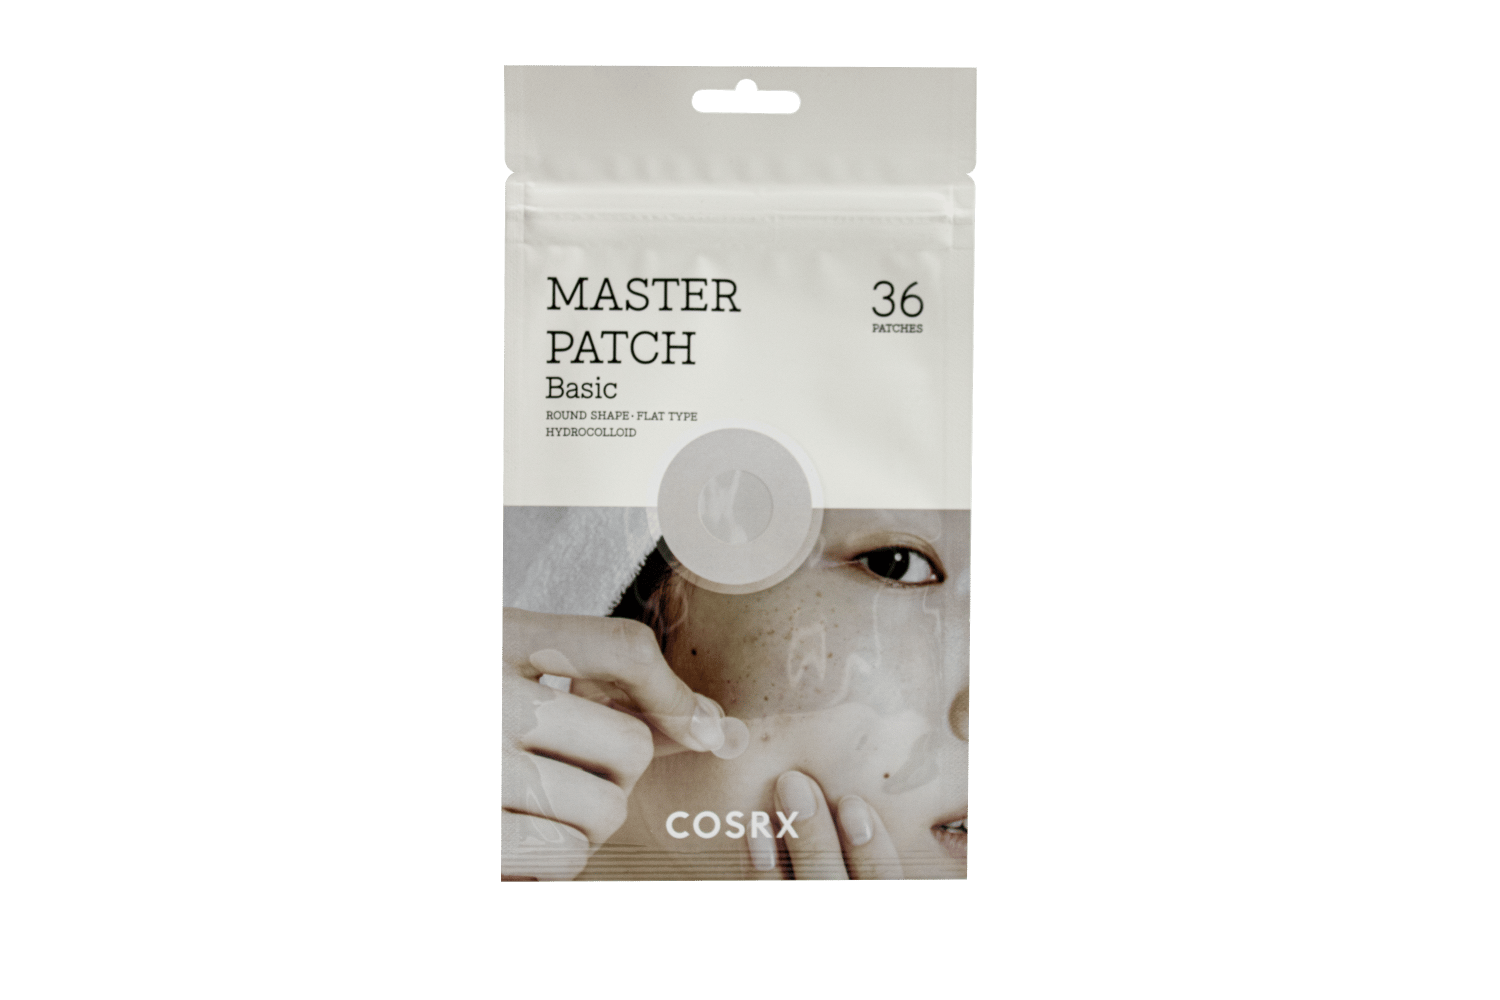 COSRX MASTER PATCH BASIC (36 PATCHES)